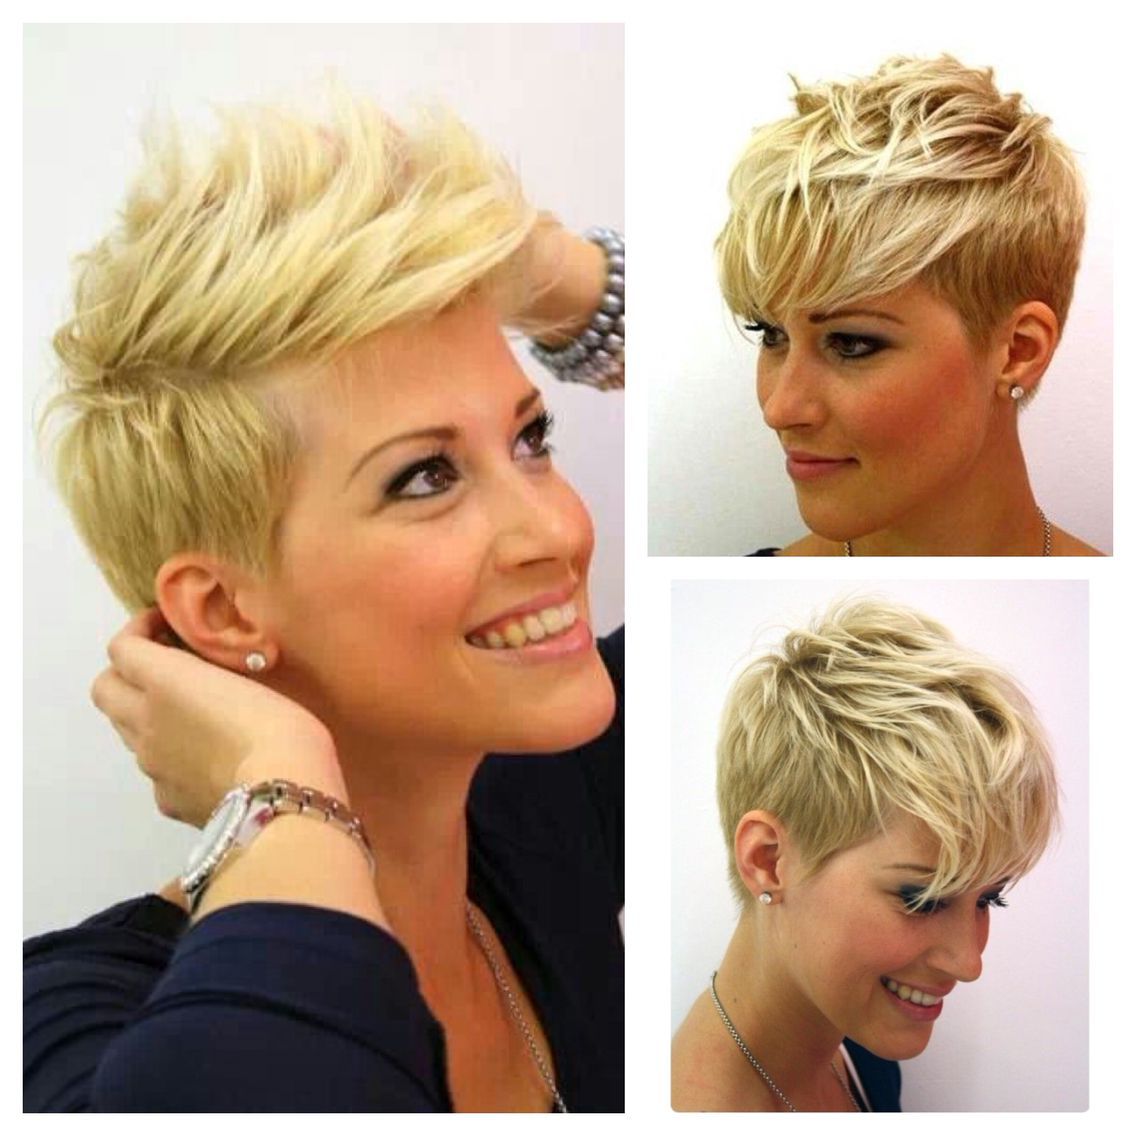 Super Cute Short Layered Pixie Cut For Fine Hair | Fun Things For My With Cute Short Haircuts For Fine Hair (View 9 of 25)